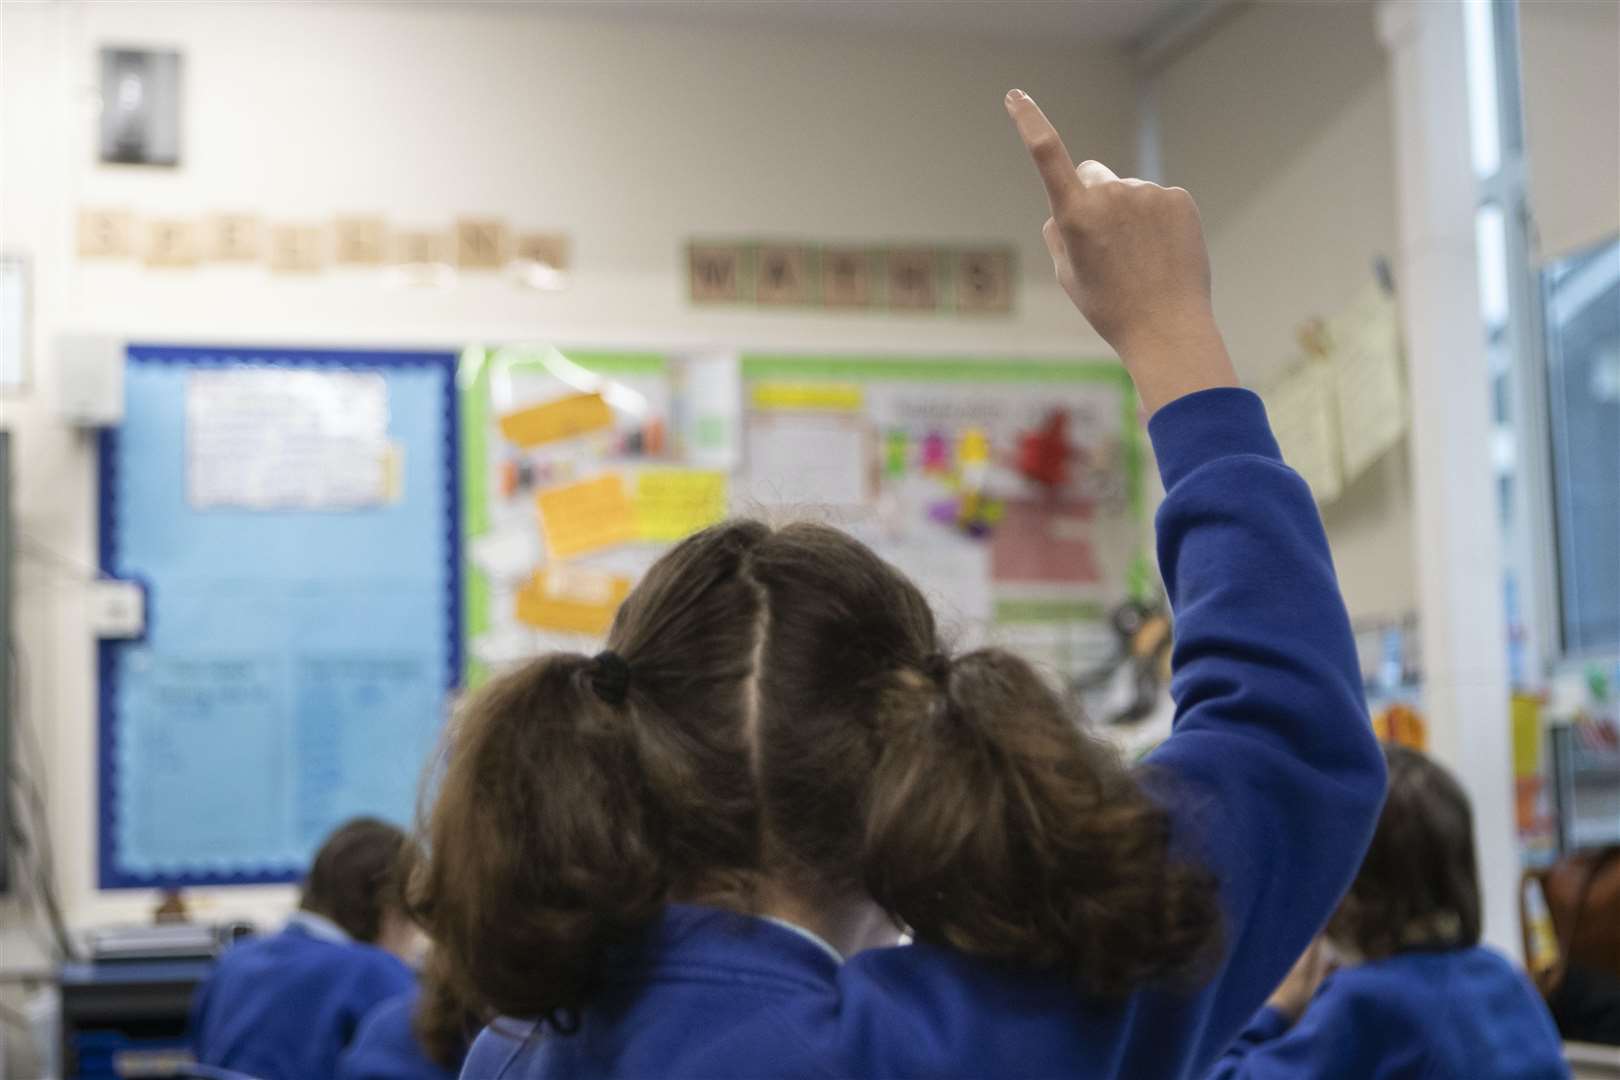 No Parent Should Be Fined If Child Misses School Due To Anxiety